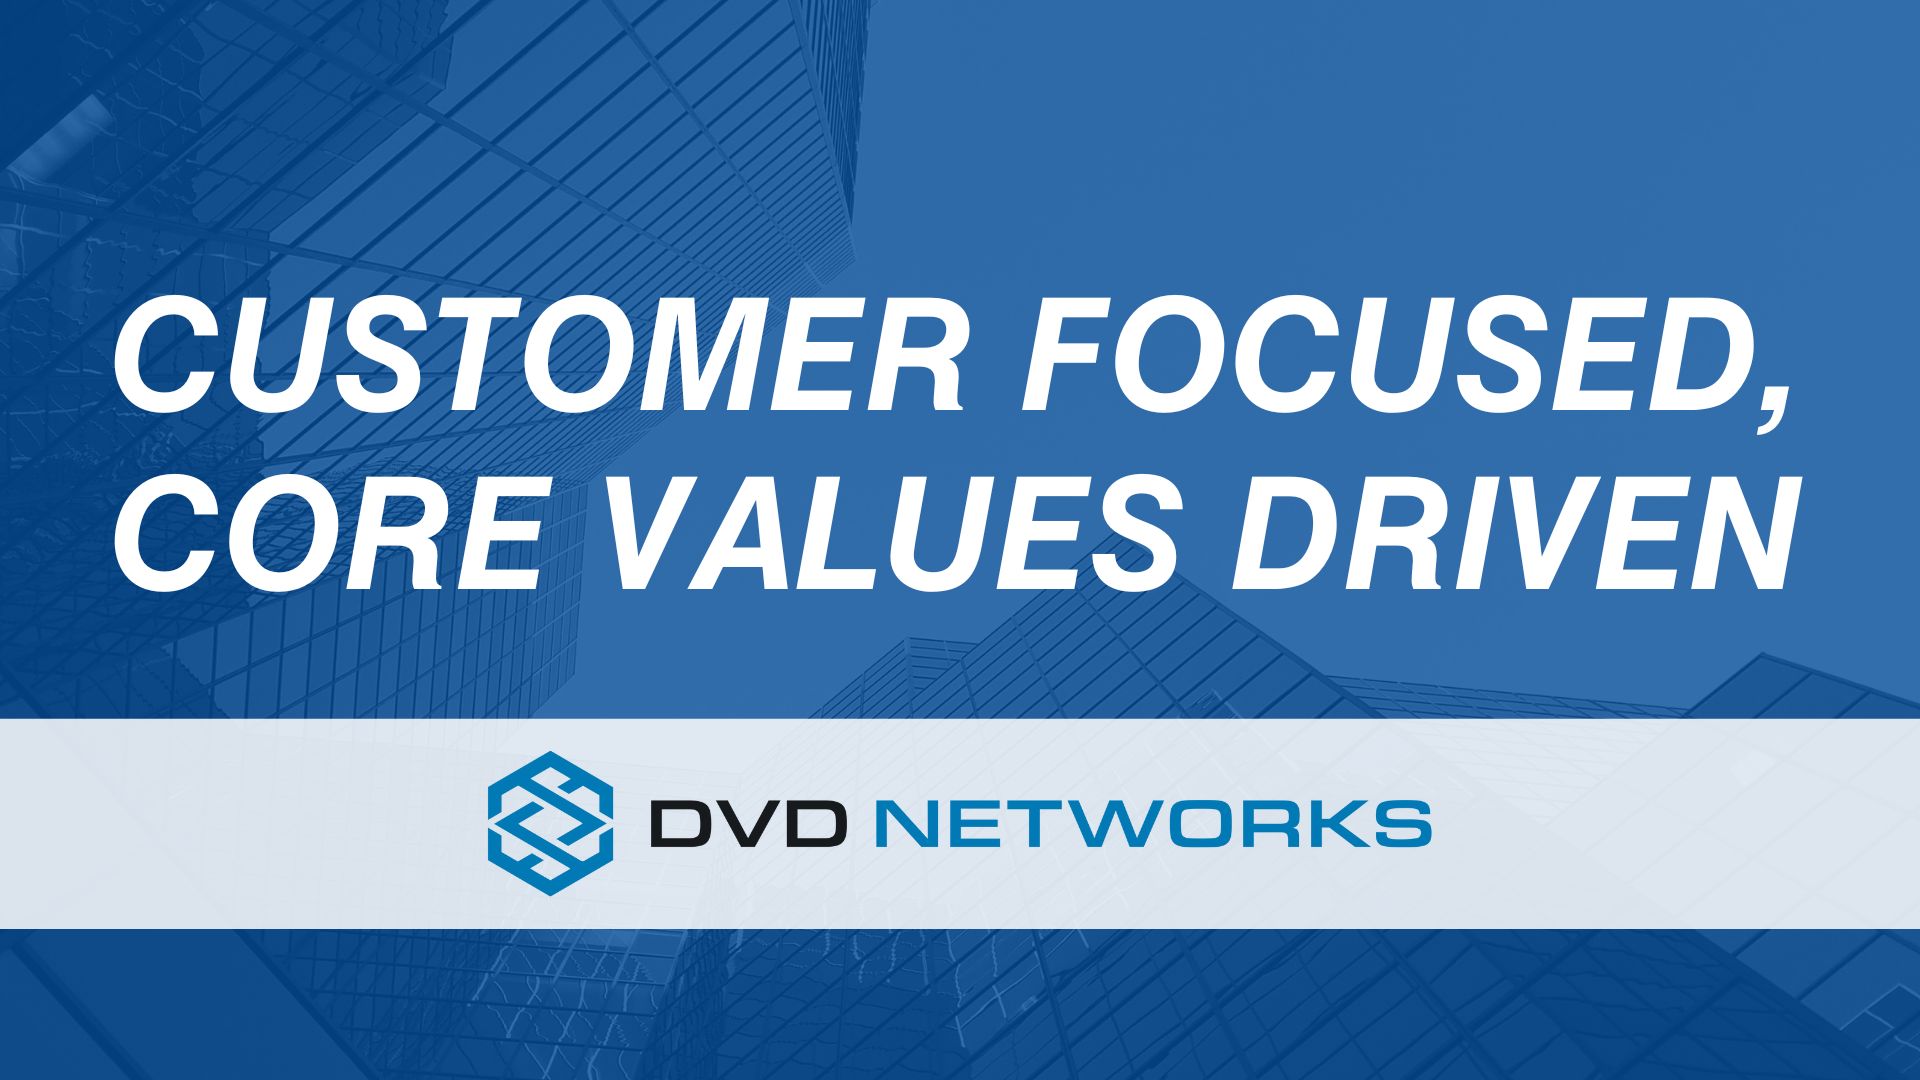 Rebrand to DVD Networks